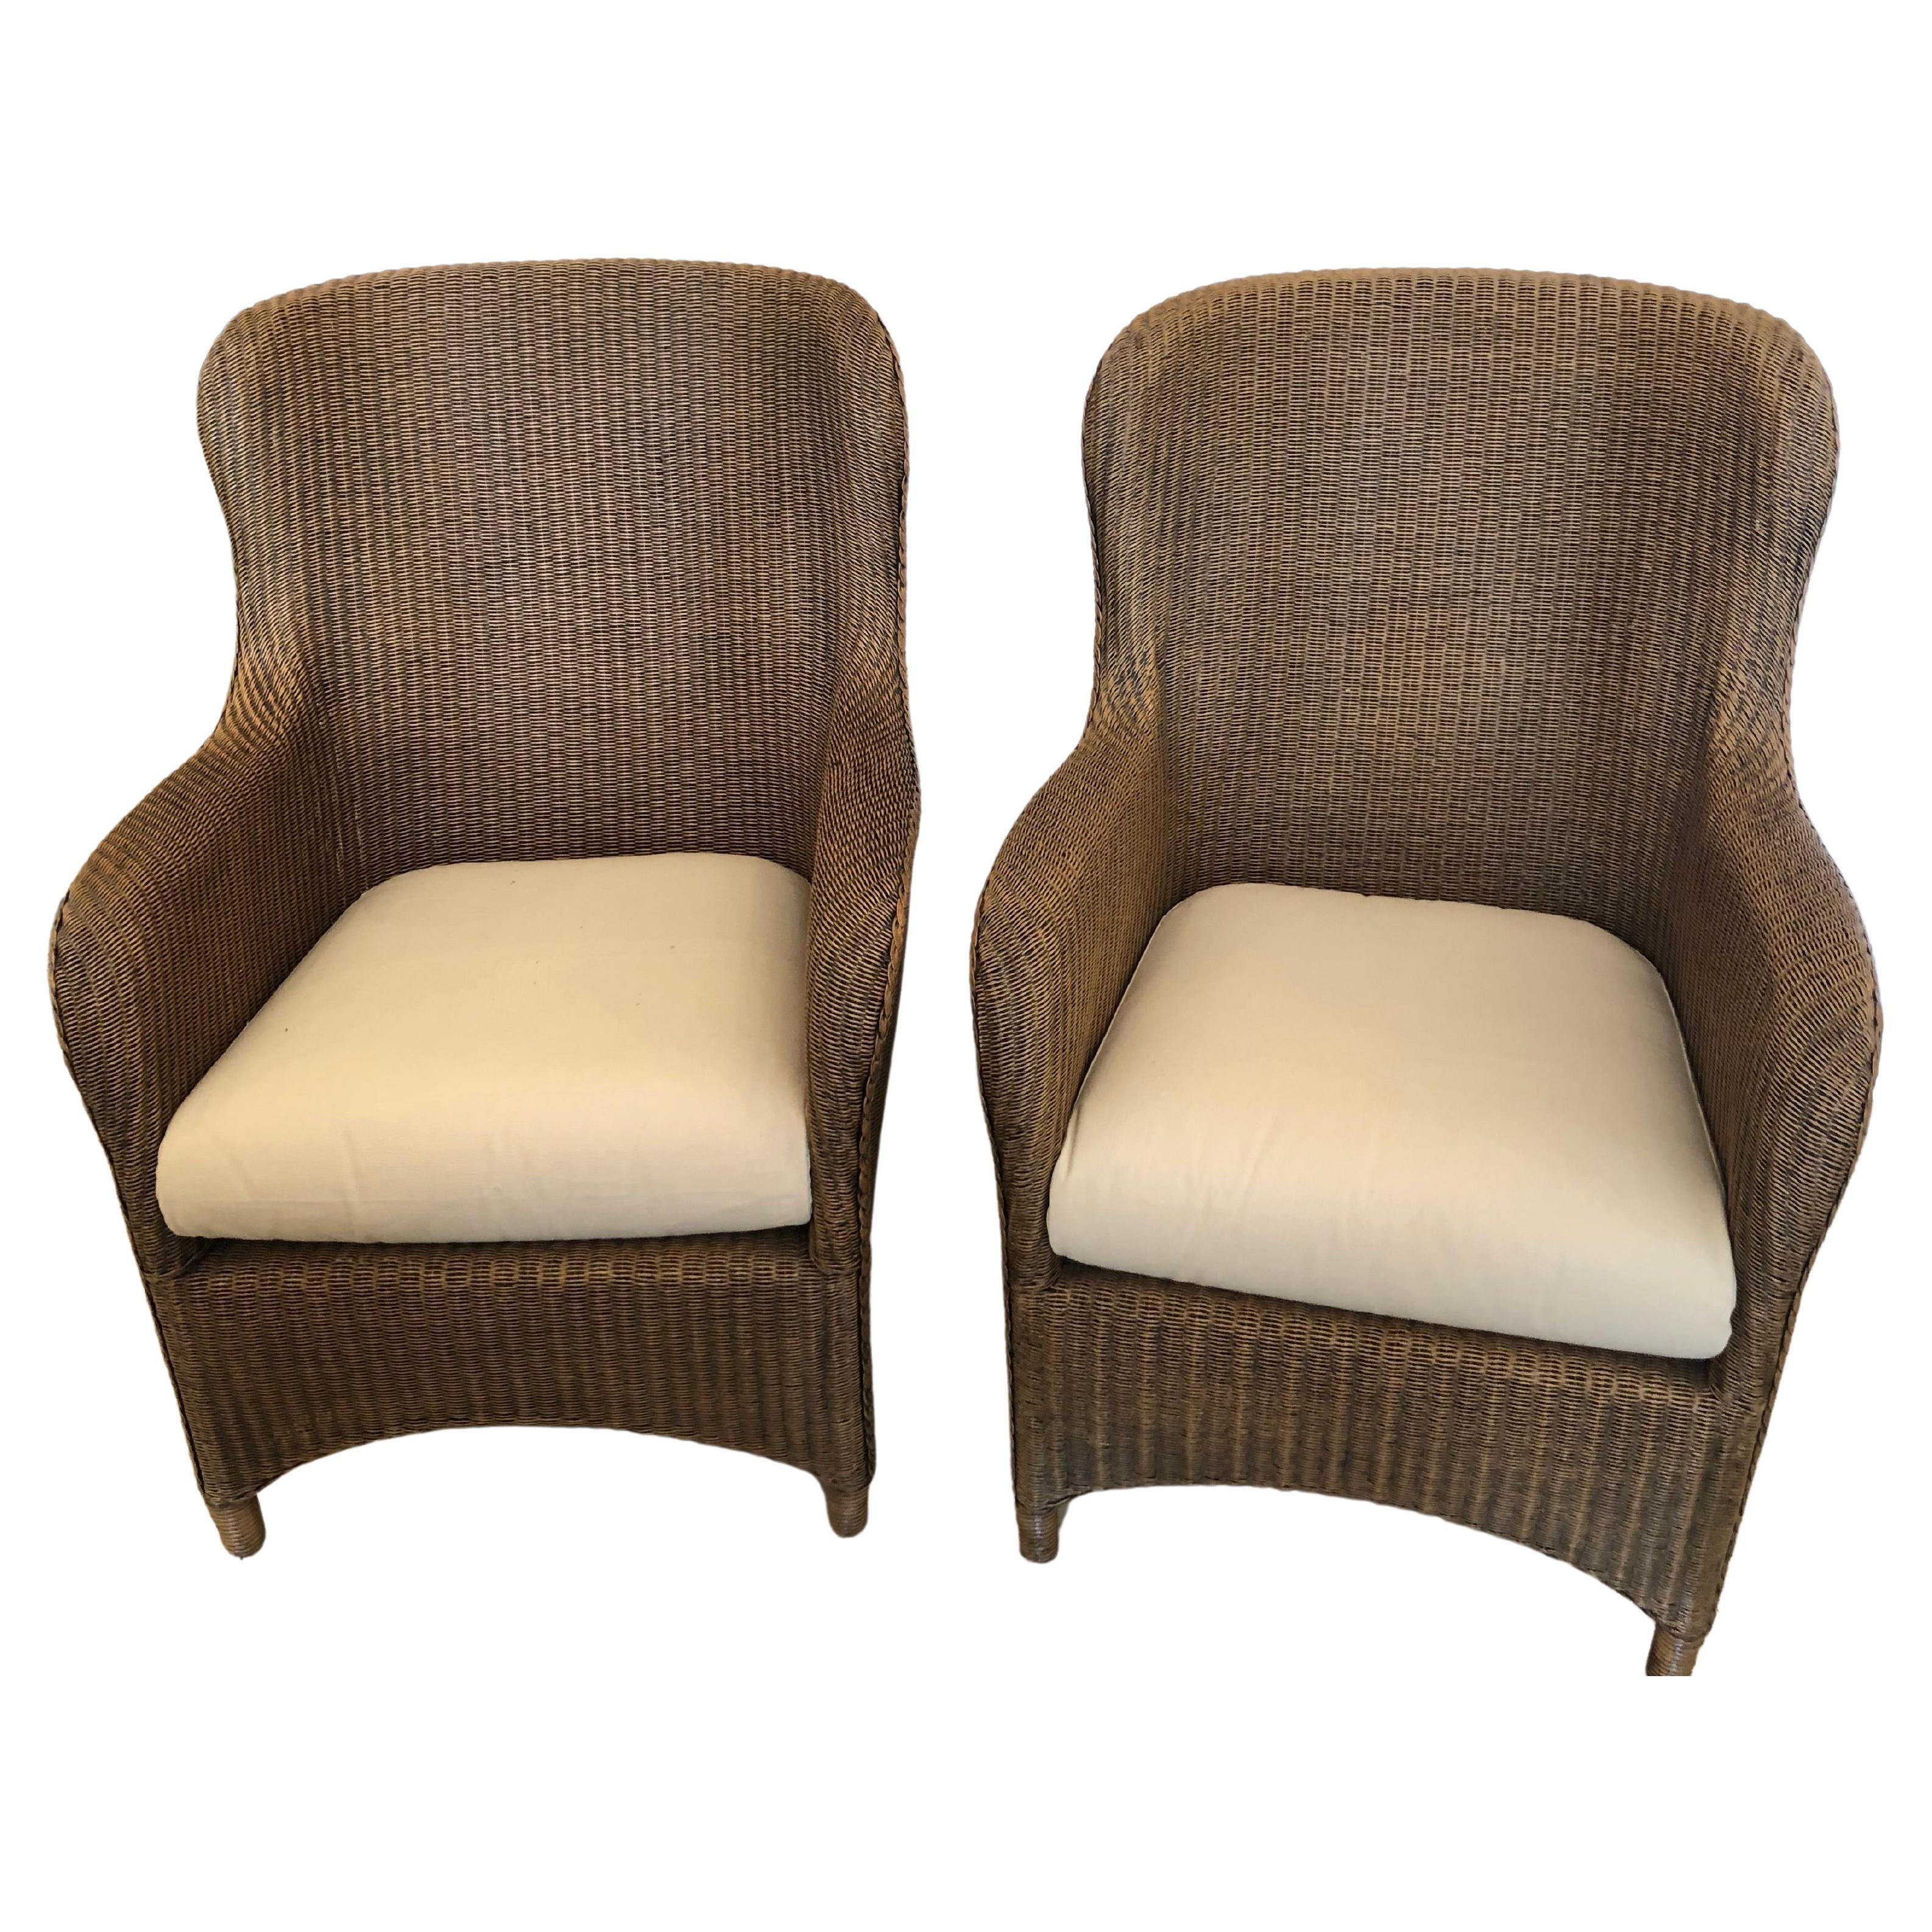 Sensational Pair of Large Curvy Natural Brown Wicker Lounge Club Chairs For Sale